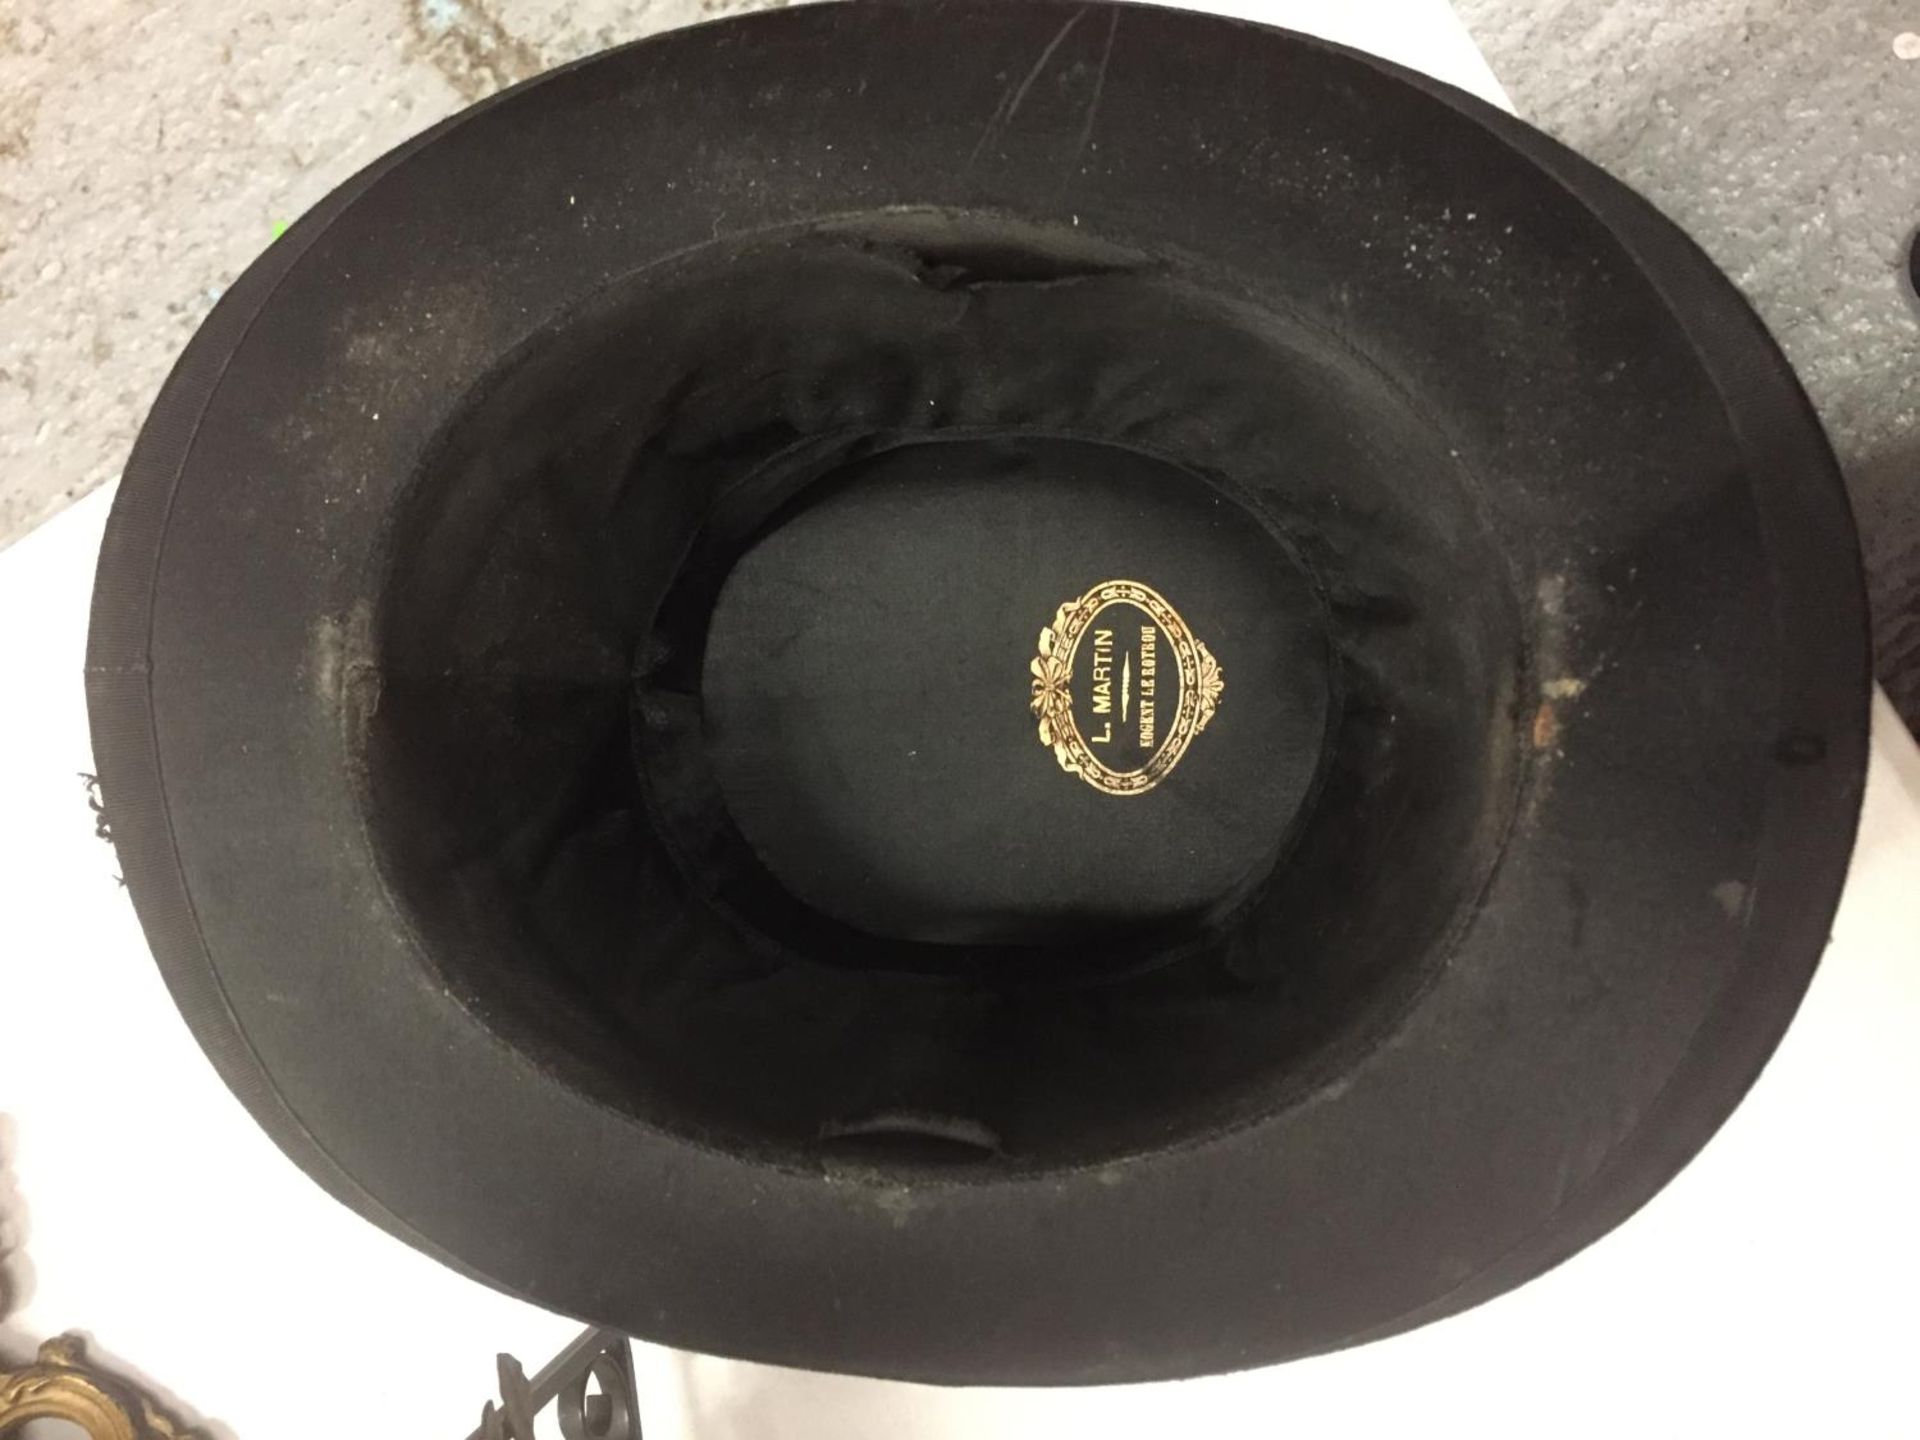 A VINTAGE FRENCH OPERA COLLAPSIBLE SATIN TOP HAT - Image 3 of 3